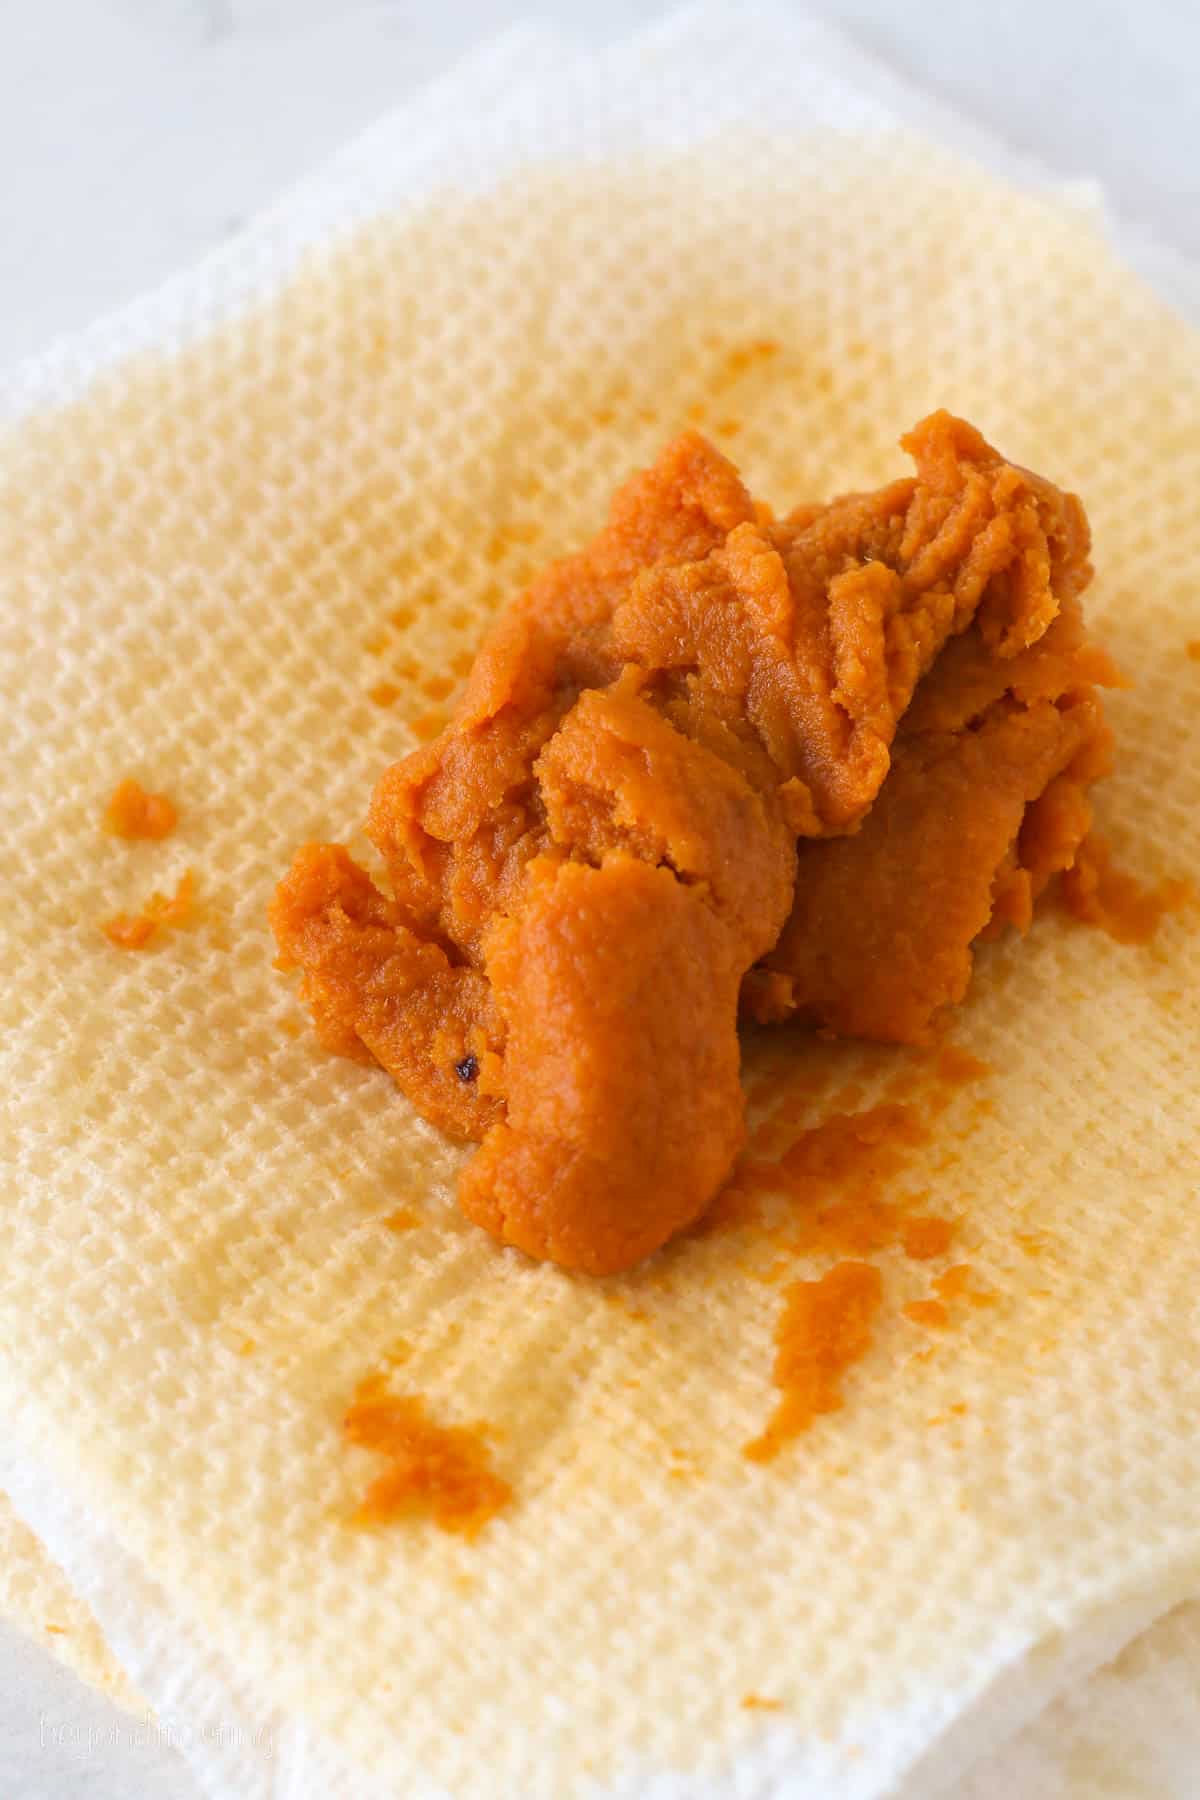 Blotted pumpkin puree on a paper towel.